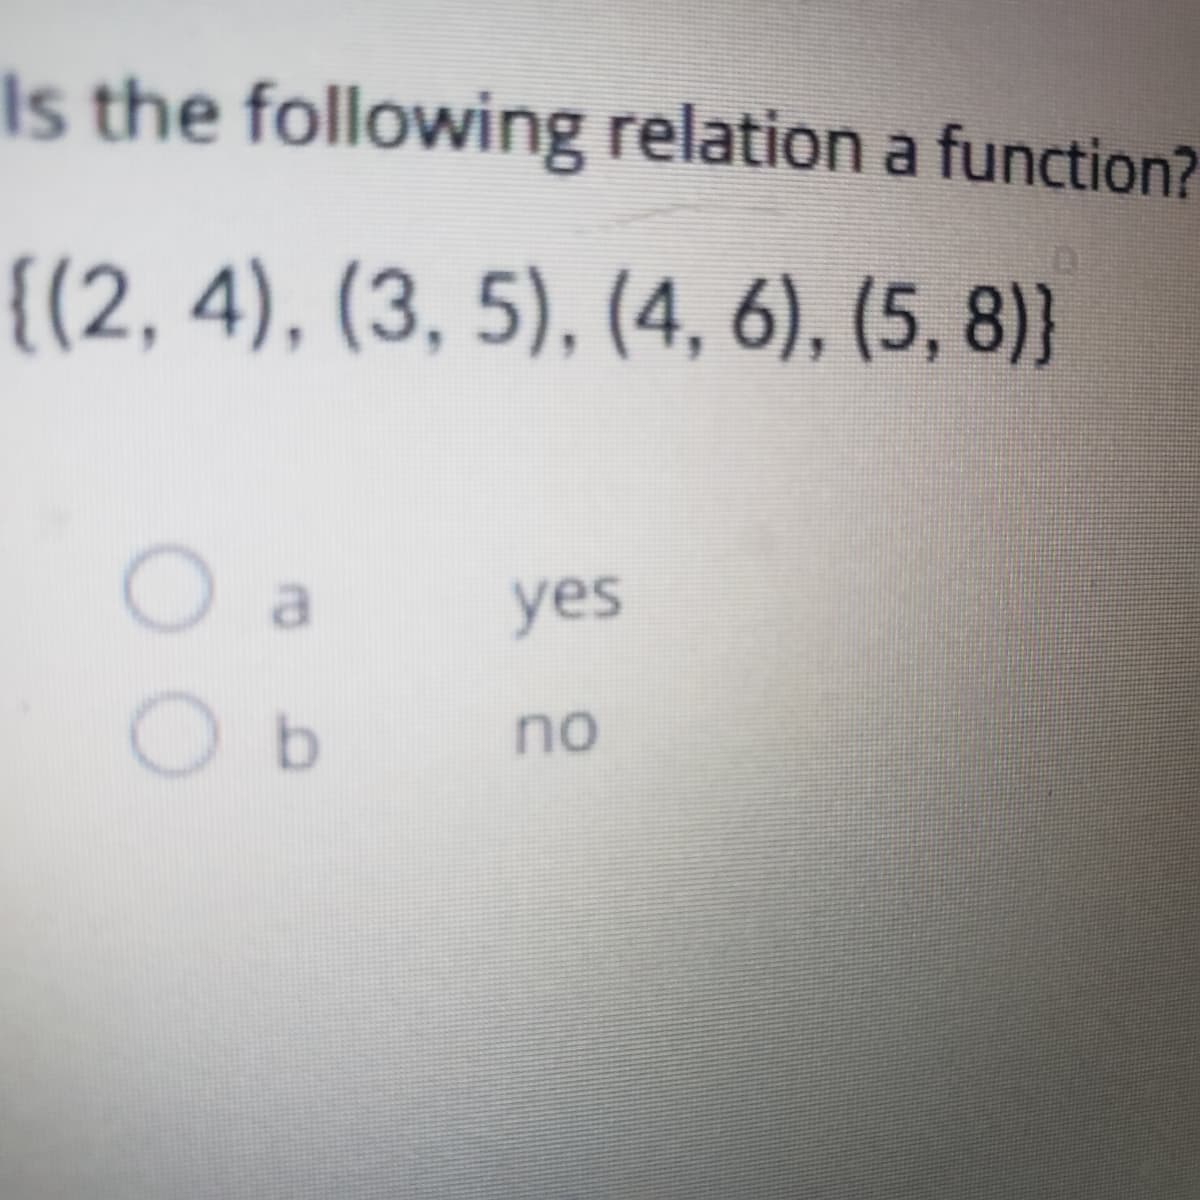 Is the following relation a function?
{(2, 4), (3, 5), (4, 6), (5, 8)}
yes
O b
no
